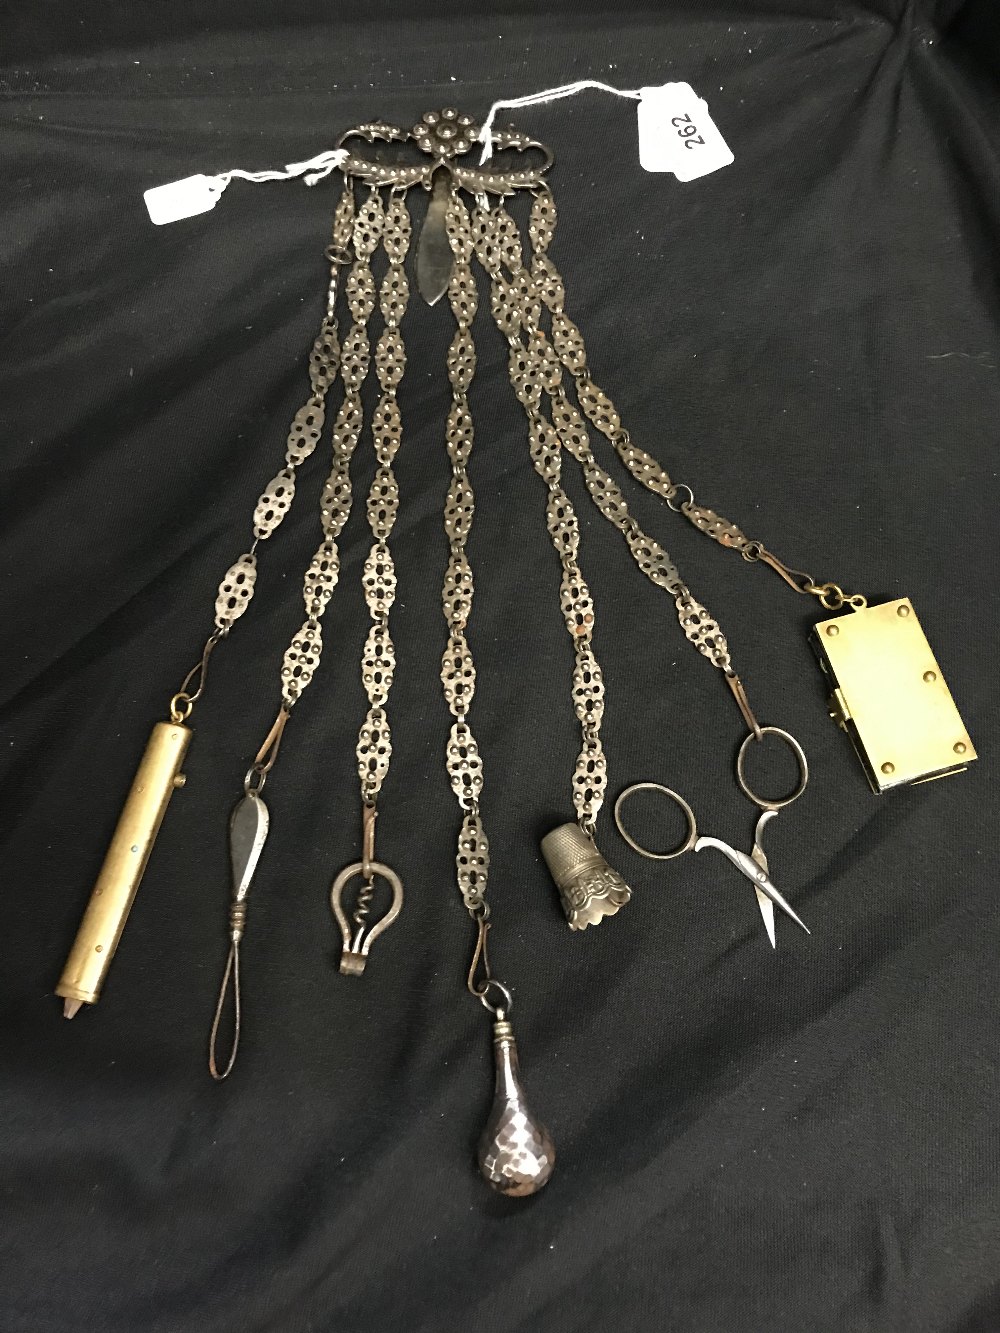 Corkscrews/Wine Collectables: Late 18th cent. Bright cut steel Chatelaine, 7 hangers with a photo - Bild 2 aus 5